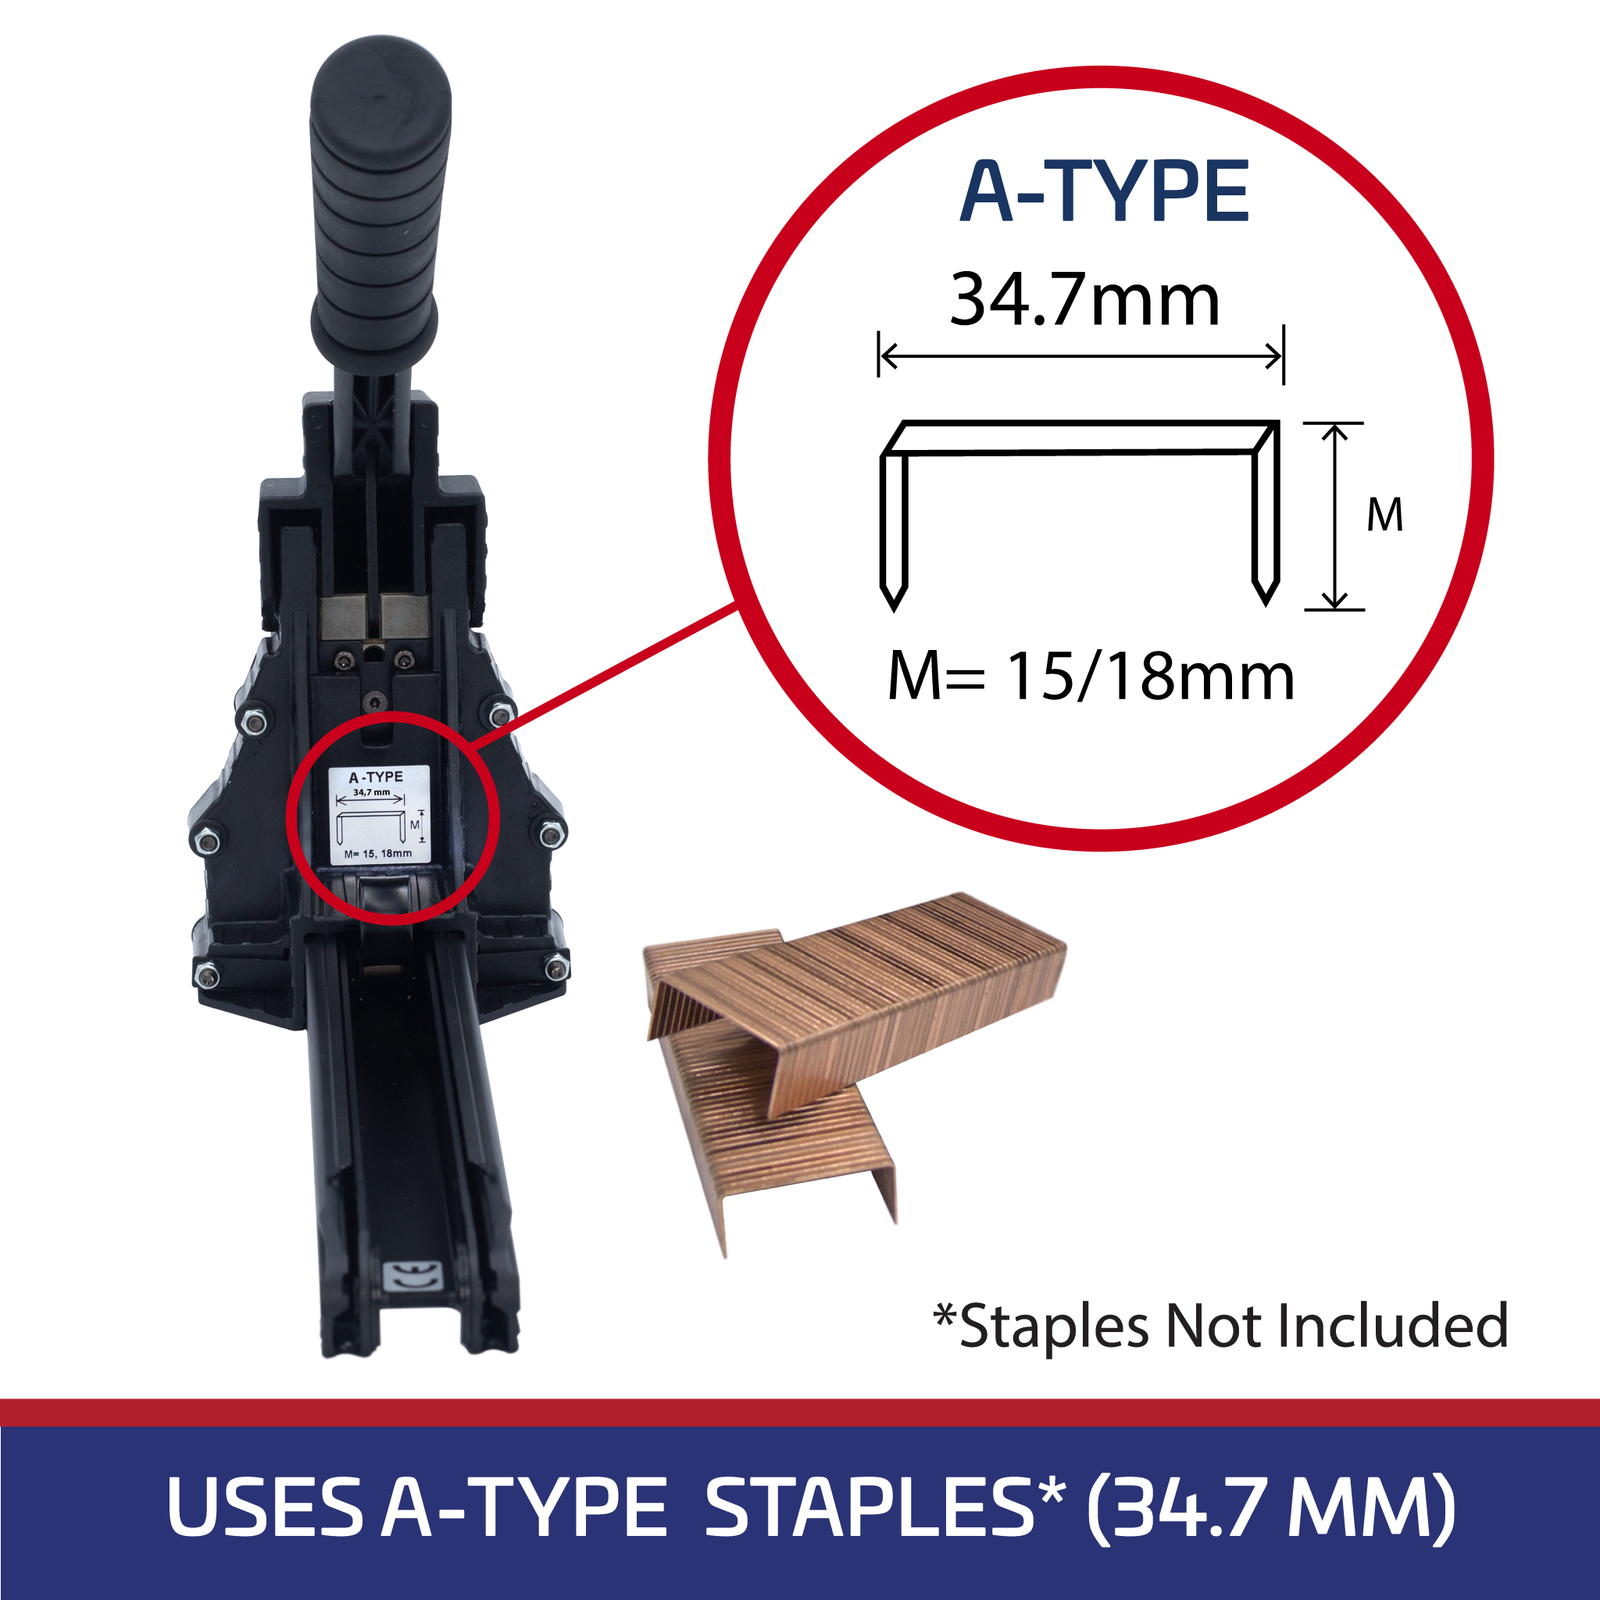 blue and red infographic showing measurements of acceptable staples for black manual carton stapler 34.7mm. Reads: staples not included.